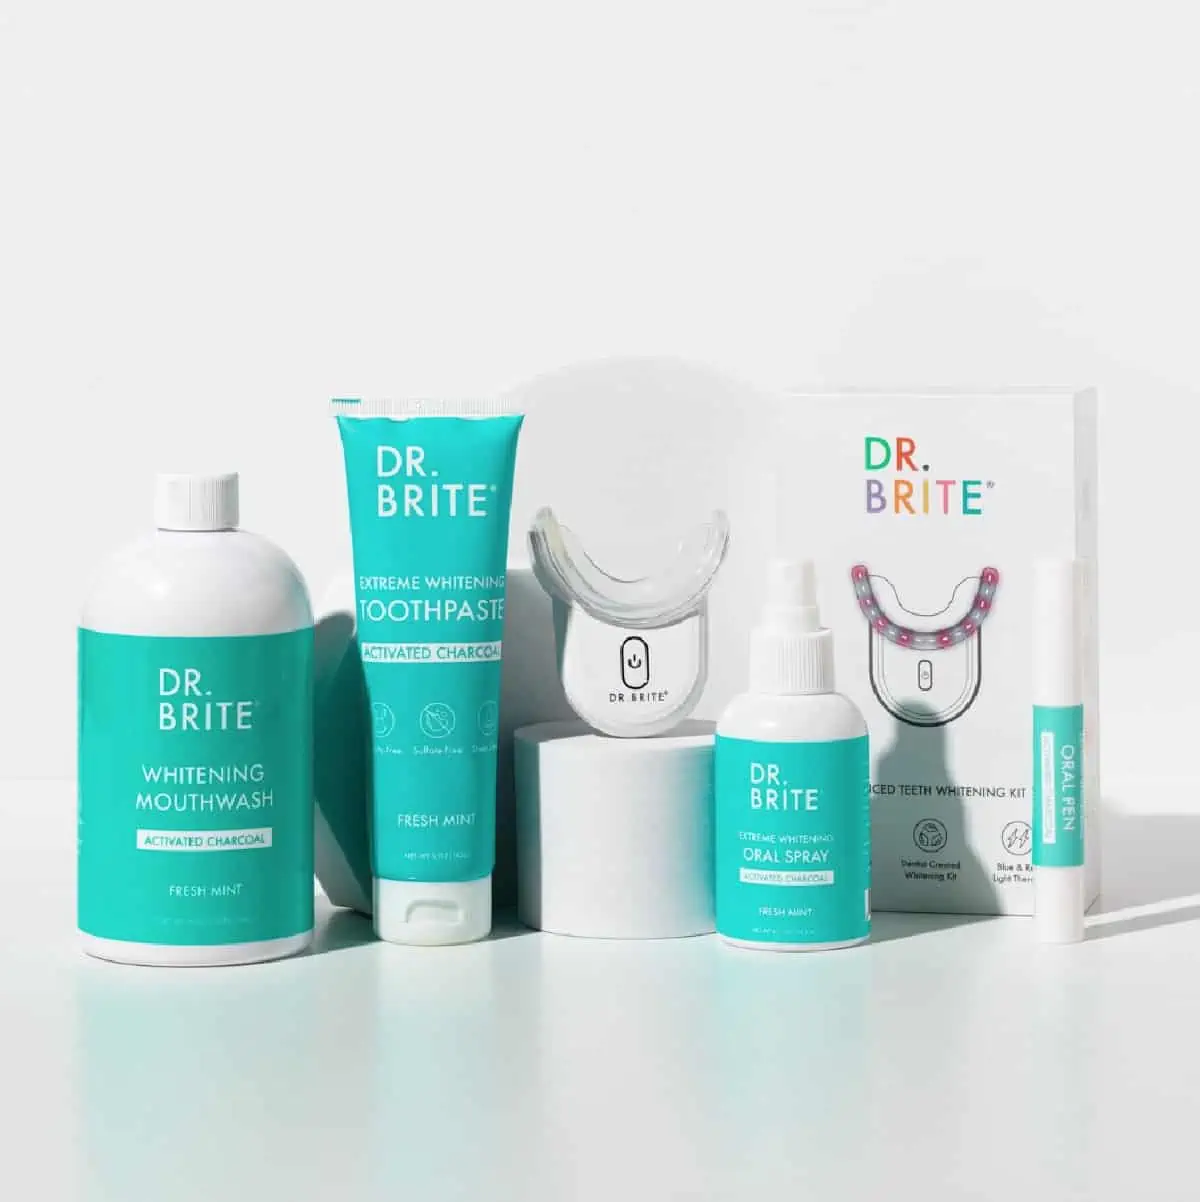 A line up of Dr. Brite oral care items in white and teal tubes and bottles against a white background.